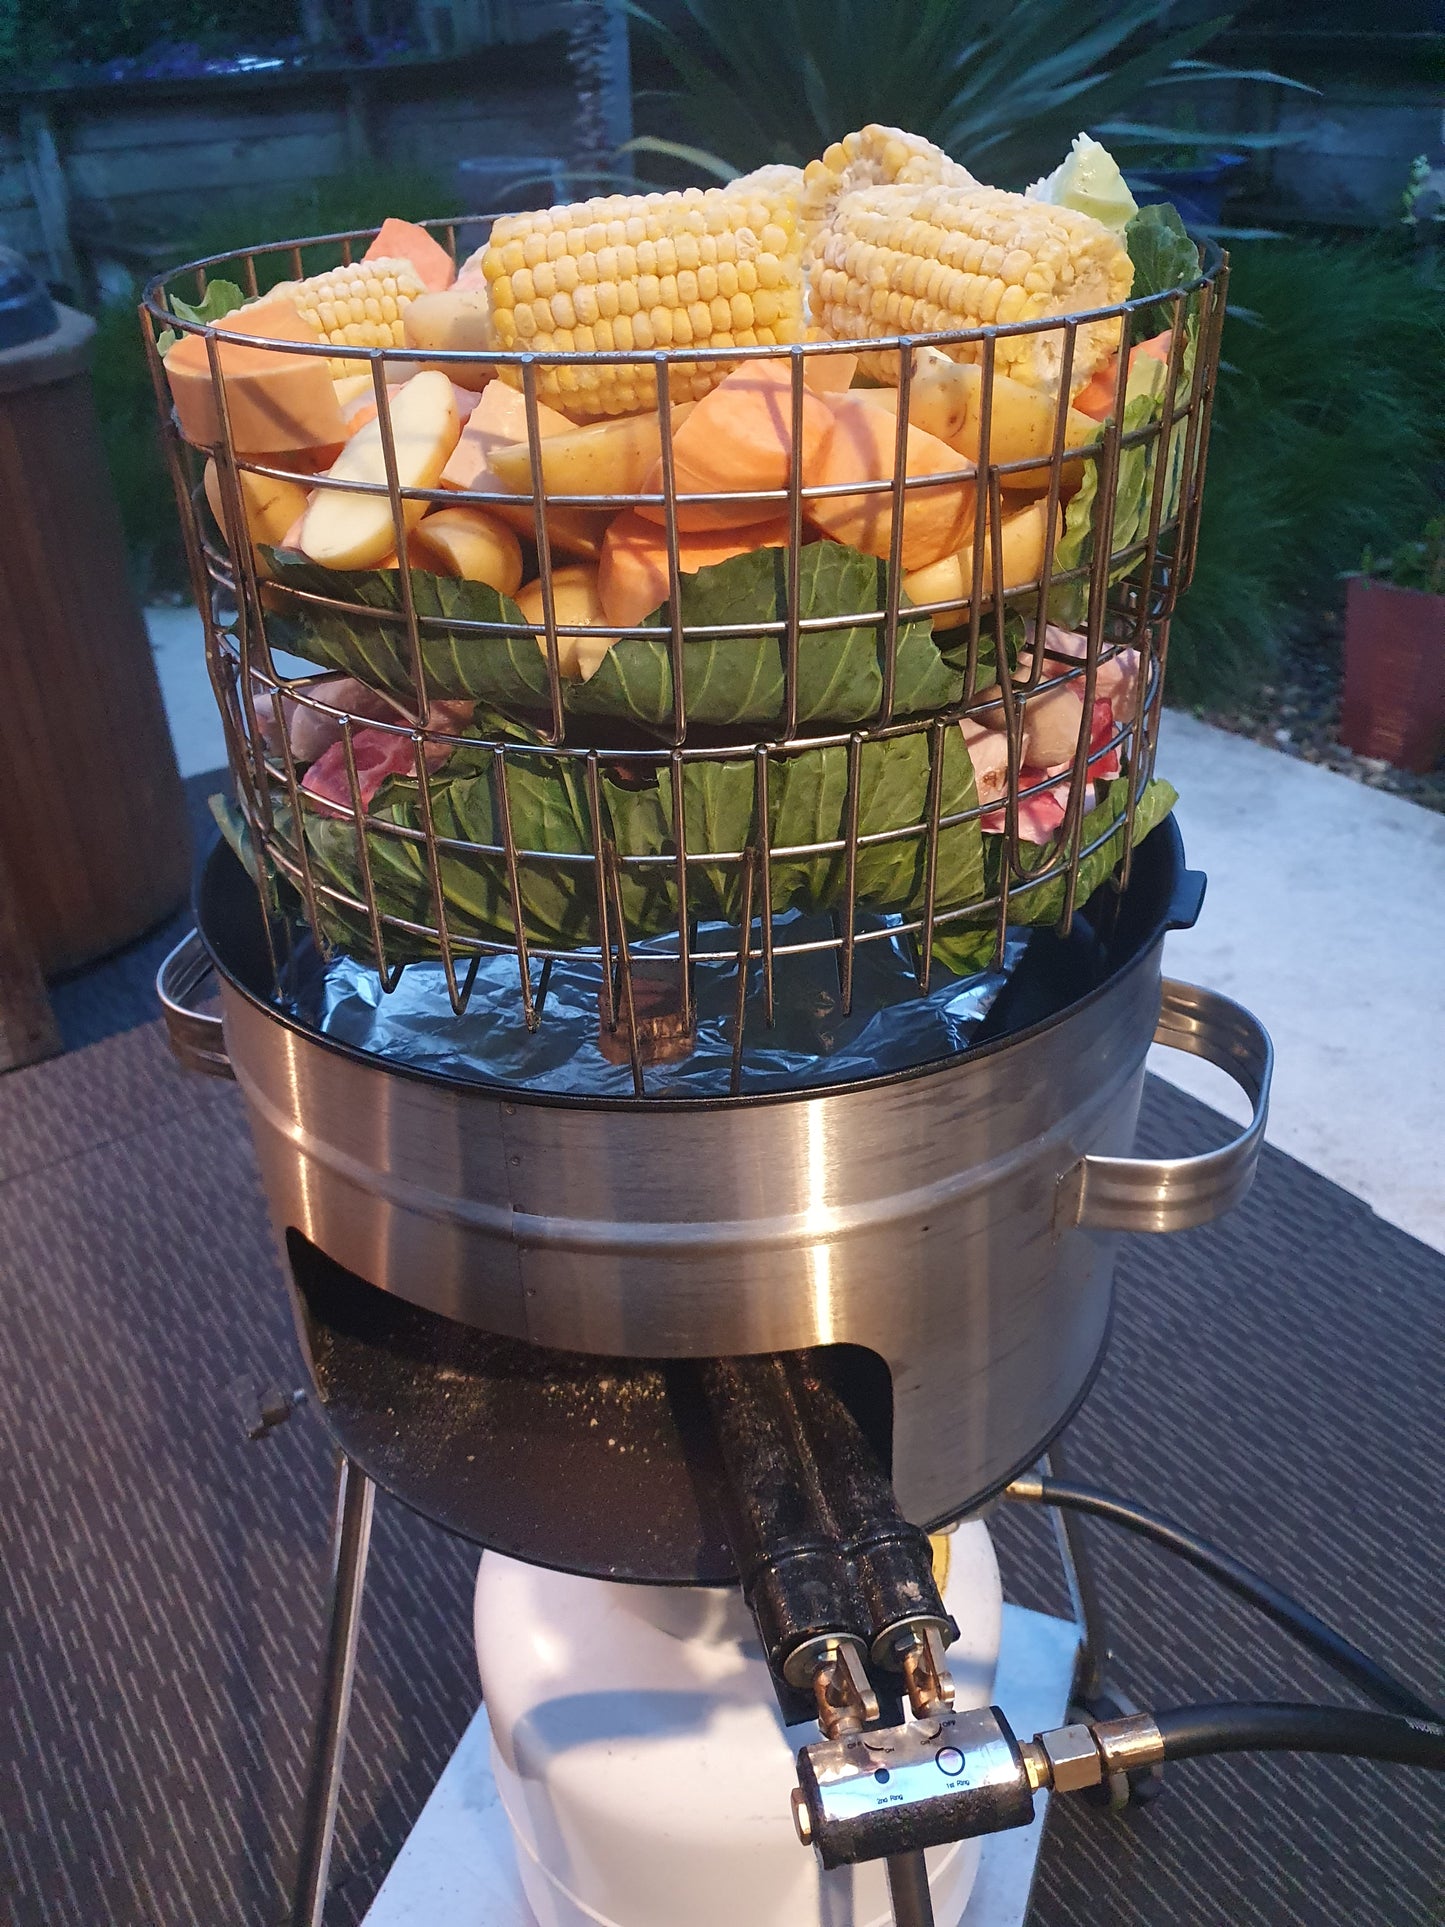 MultiKai 2 Basket Cooker with Trolley (dispatch up to 3 working days once payment has been made)